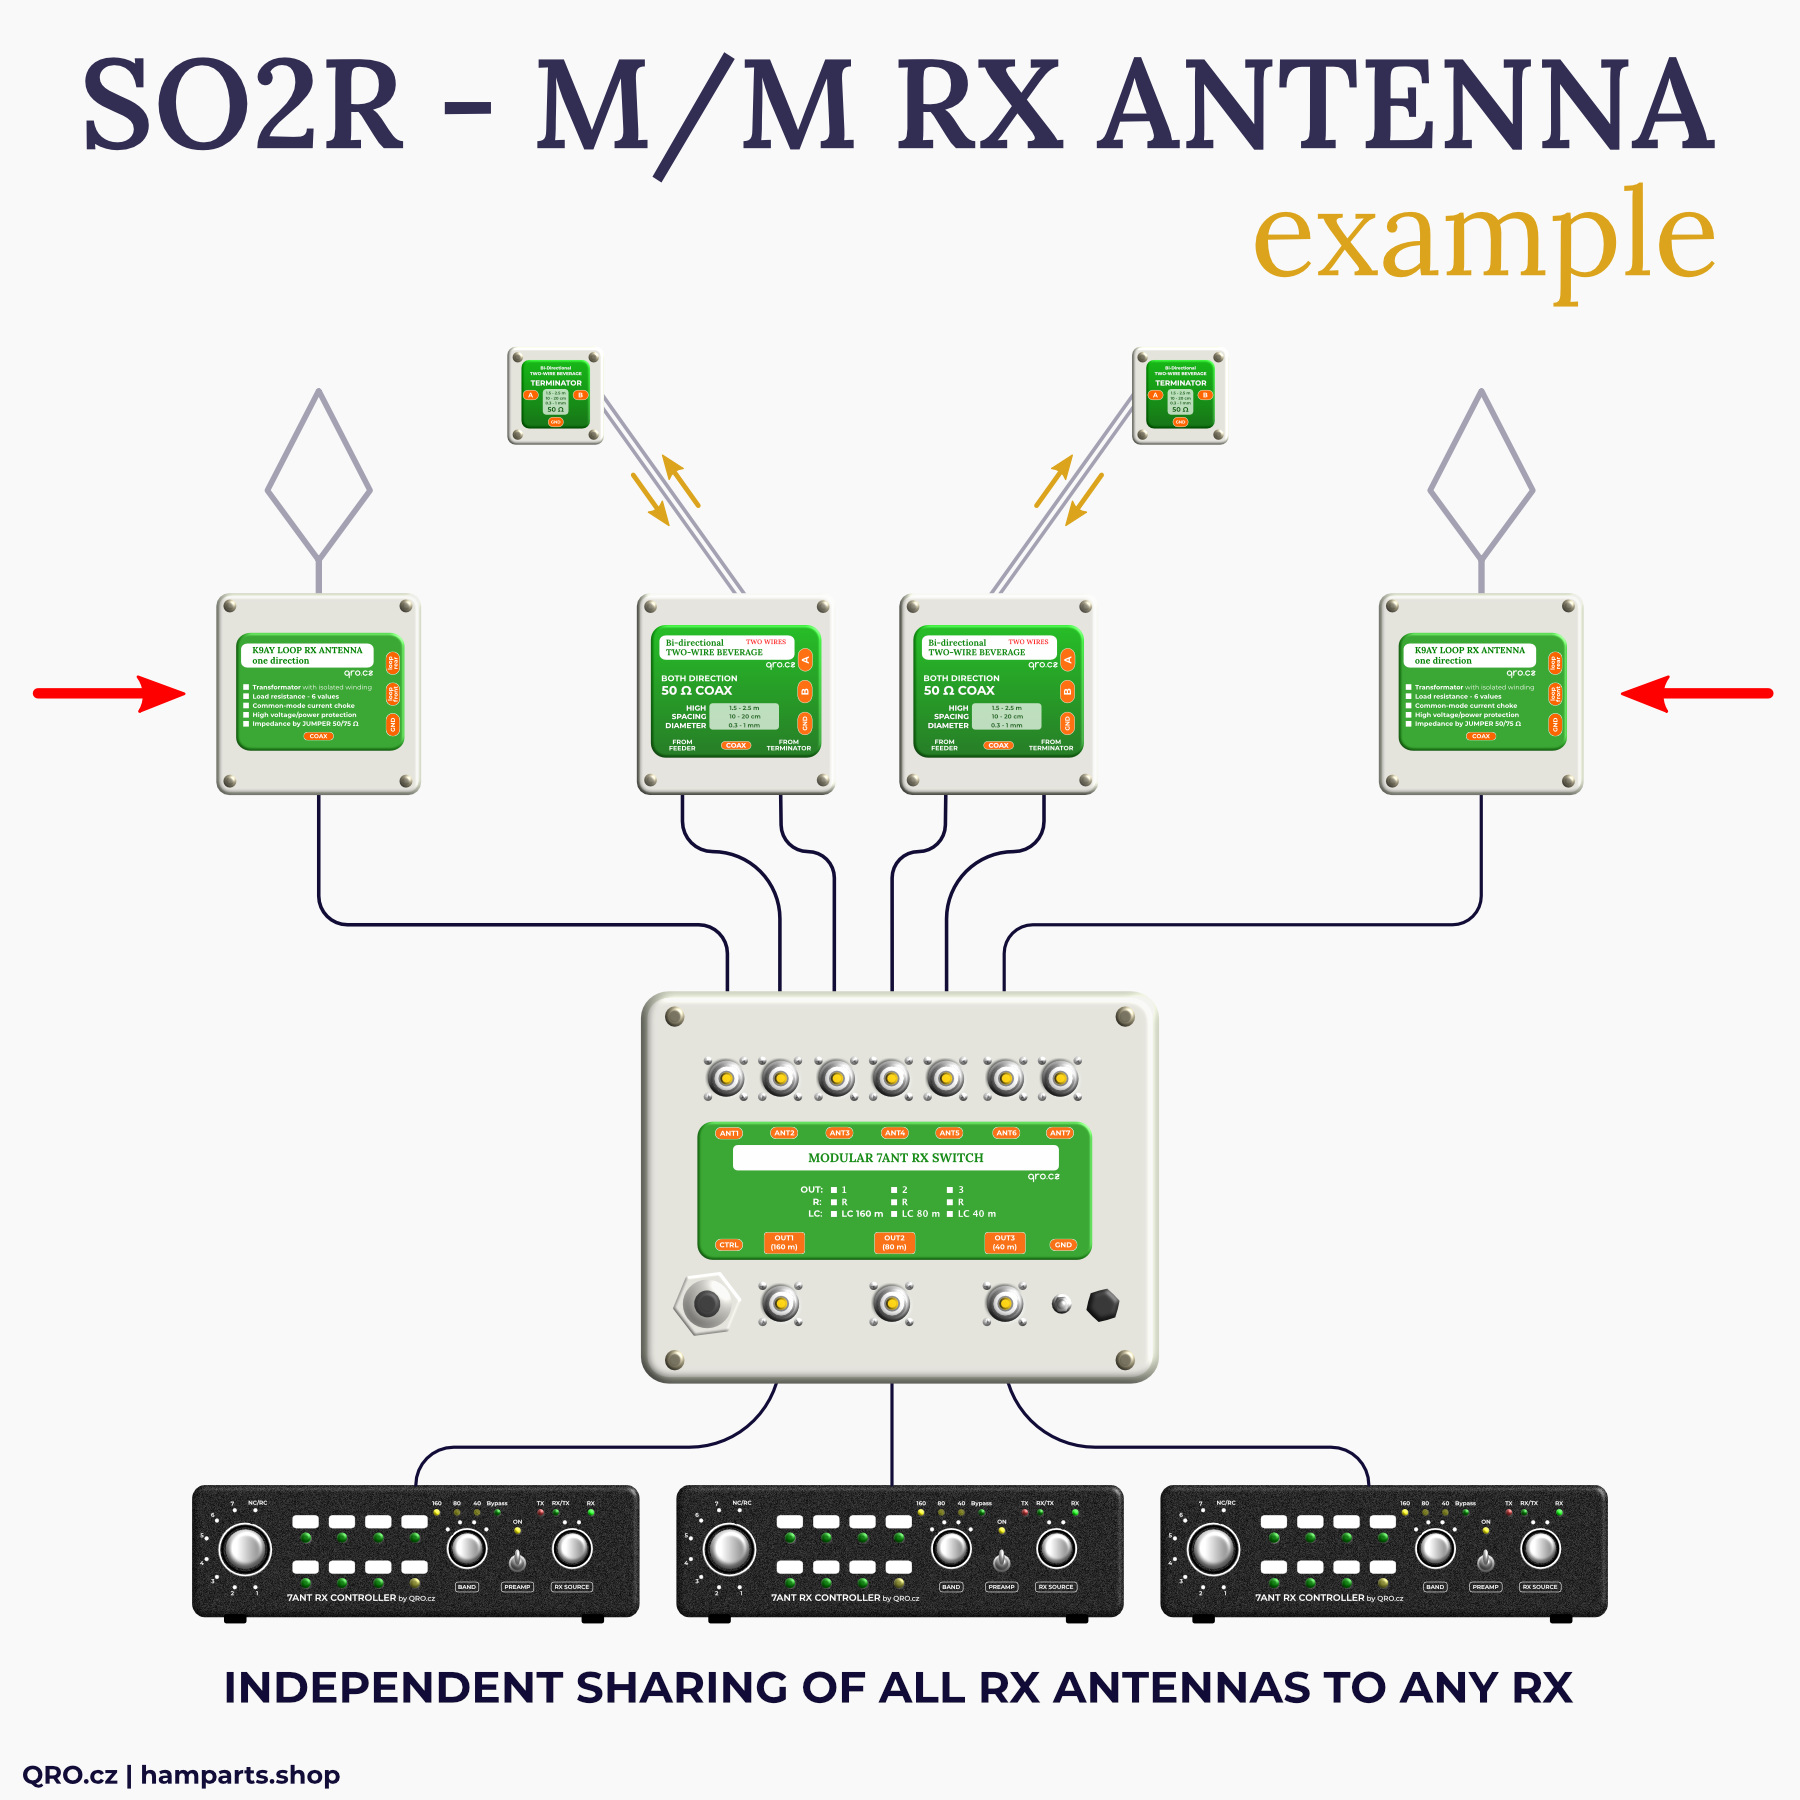 rx antenna k9ay one direction with 7ant modular switch bi-directional beverage qro.cz hamparts.shop